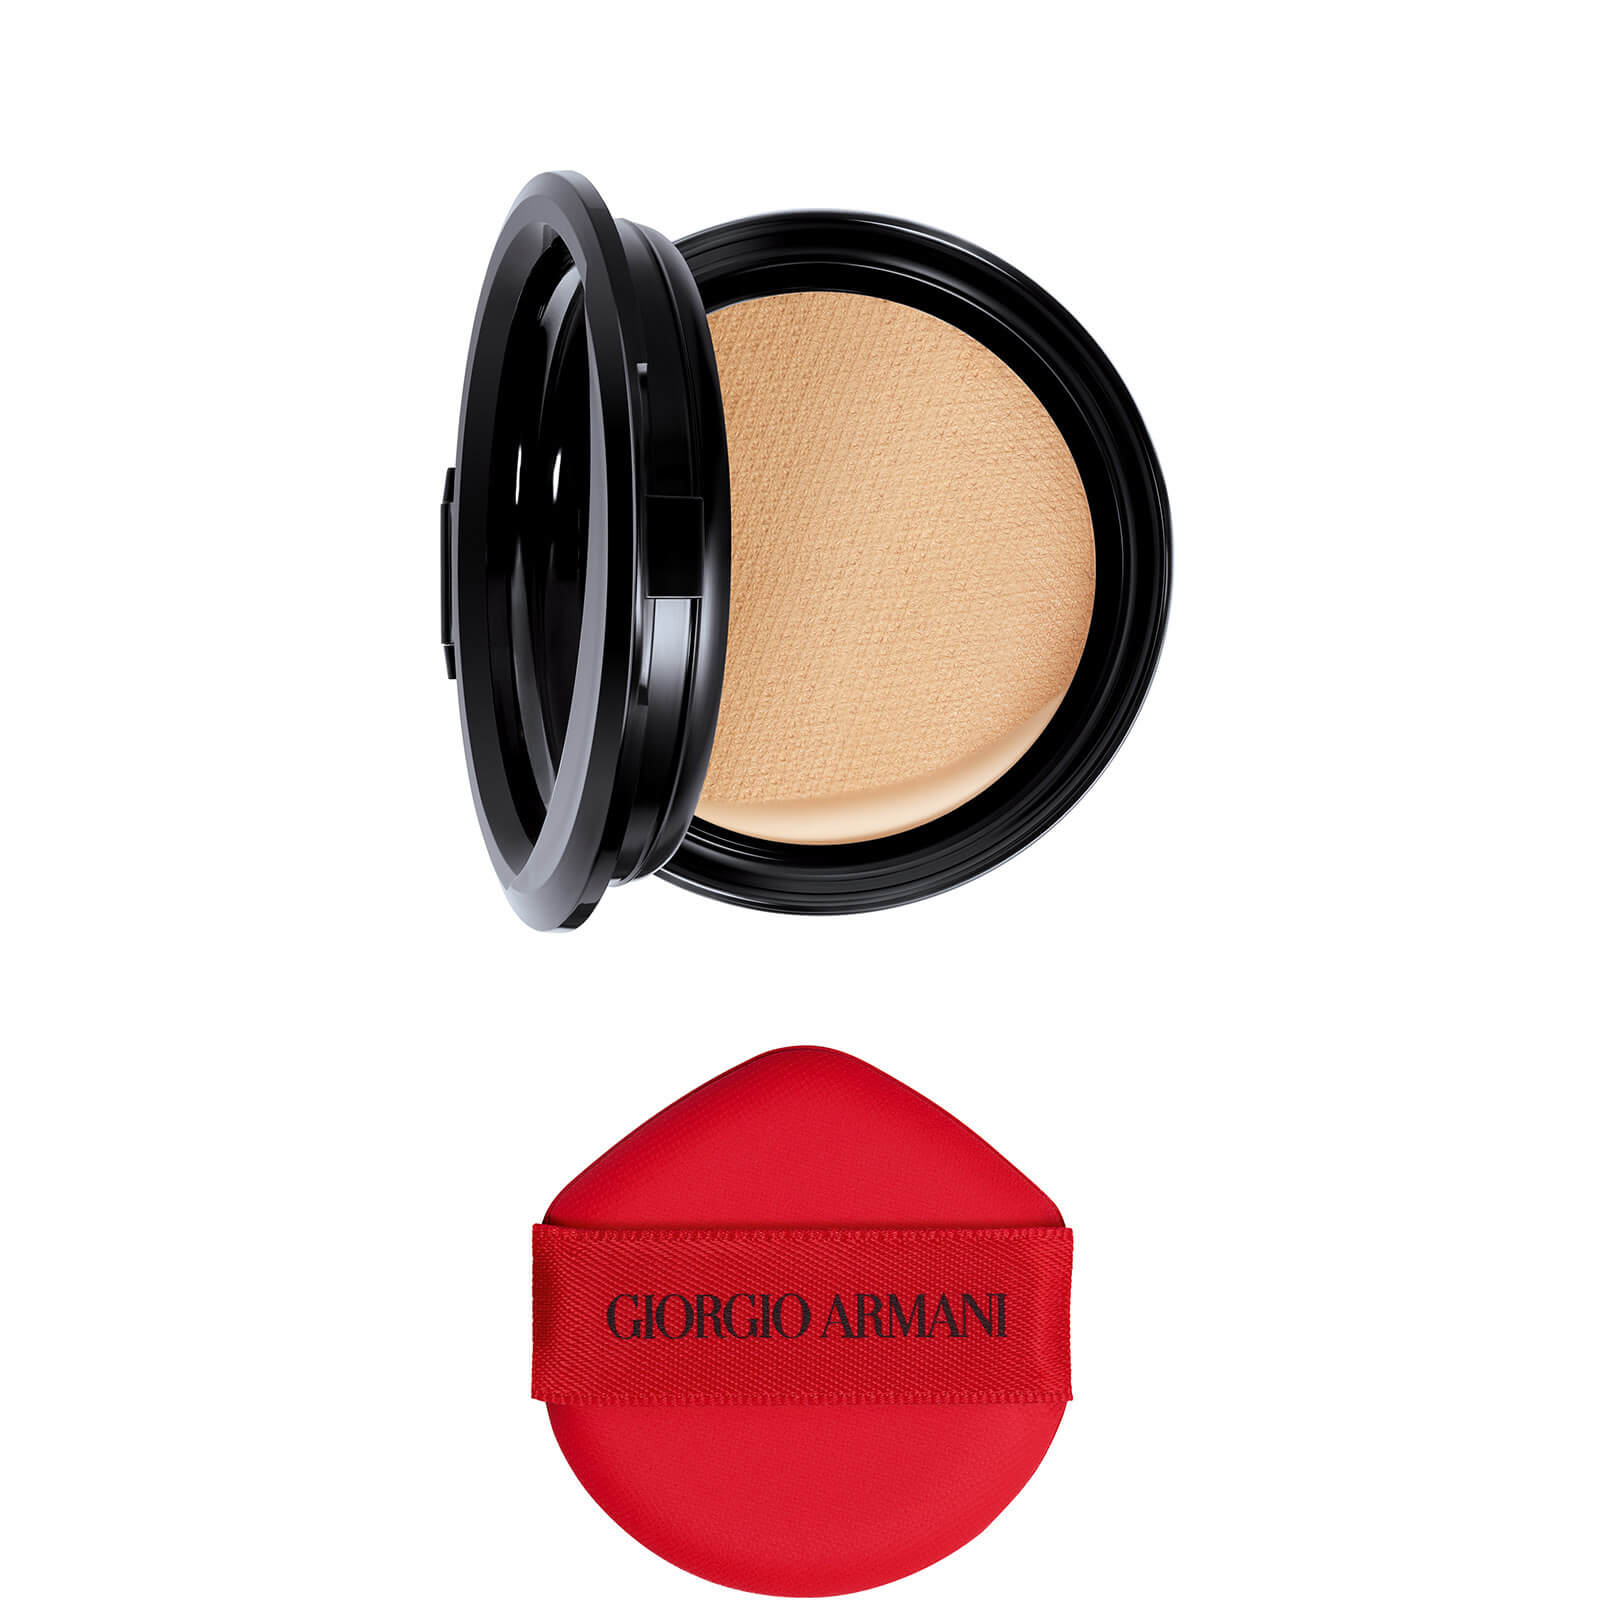 Photos - Foundation & Concealer Armani Red Cushion R21 Foundation Refill 15g  - 4 LC555300 (Various Shades)